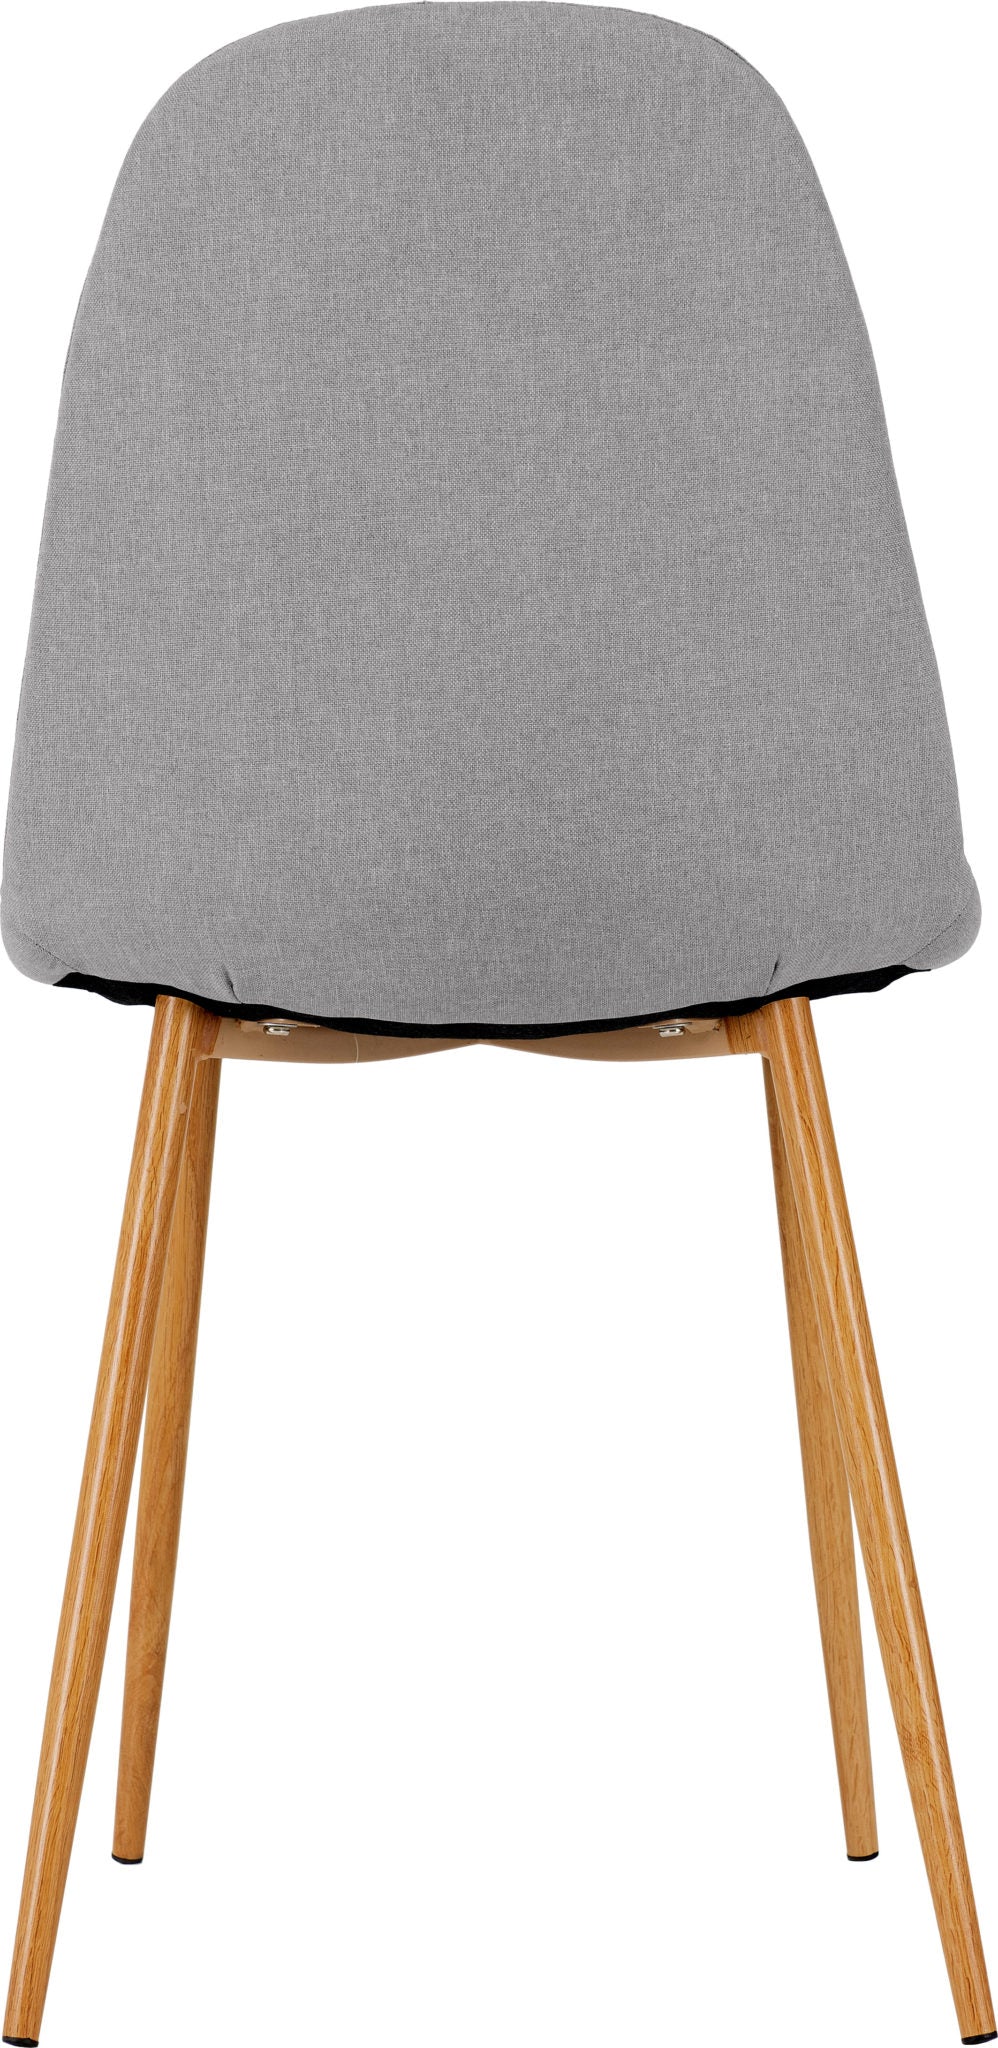 Barley Chair - Grey Fabric- The Right Buy Store